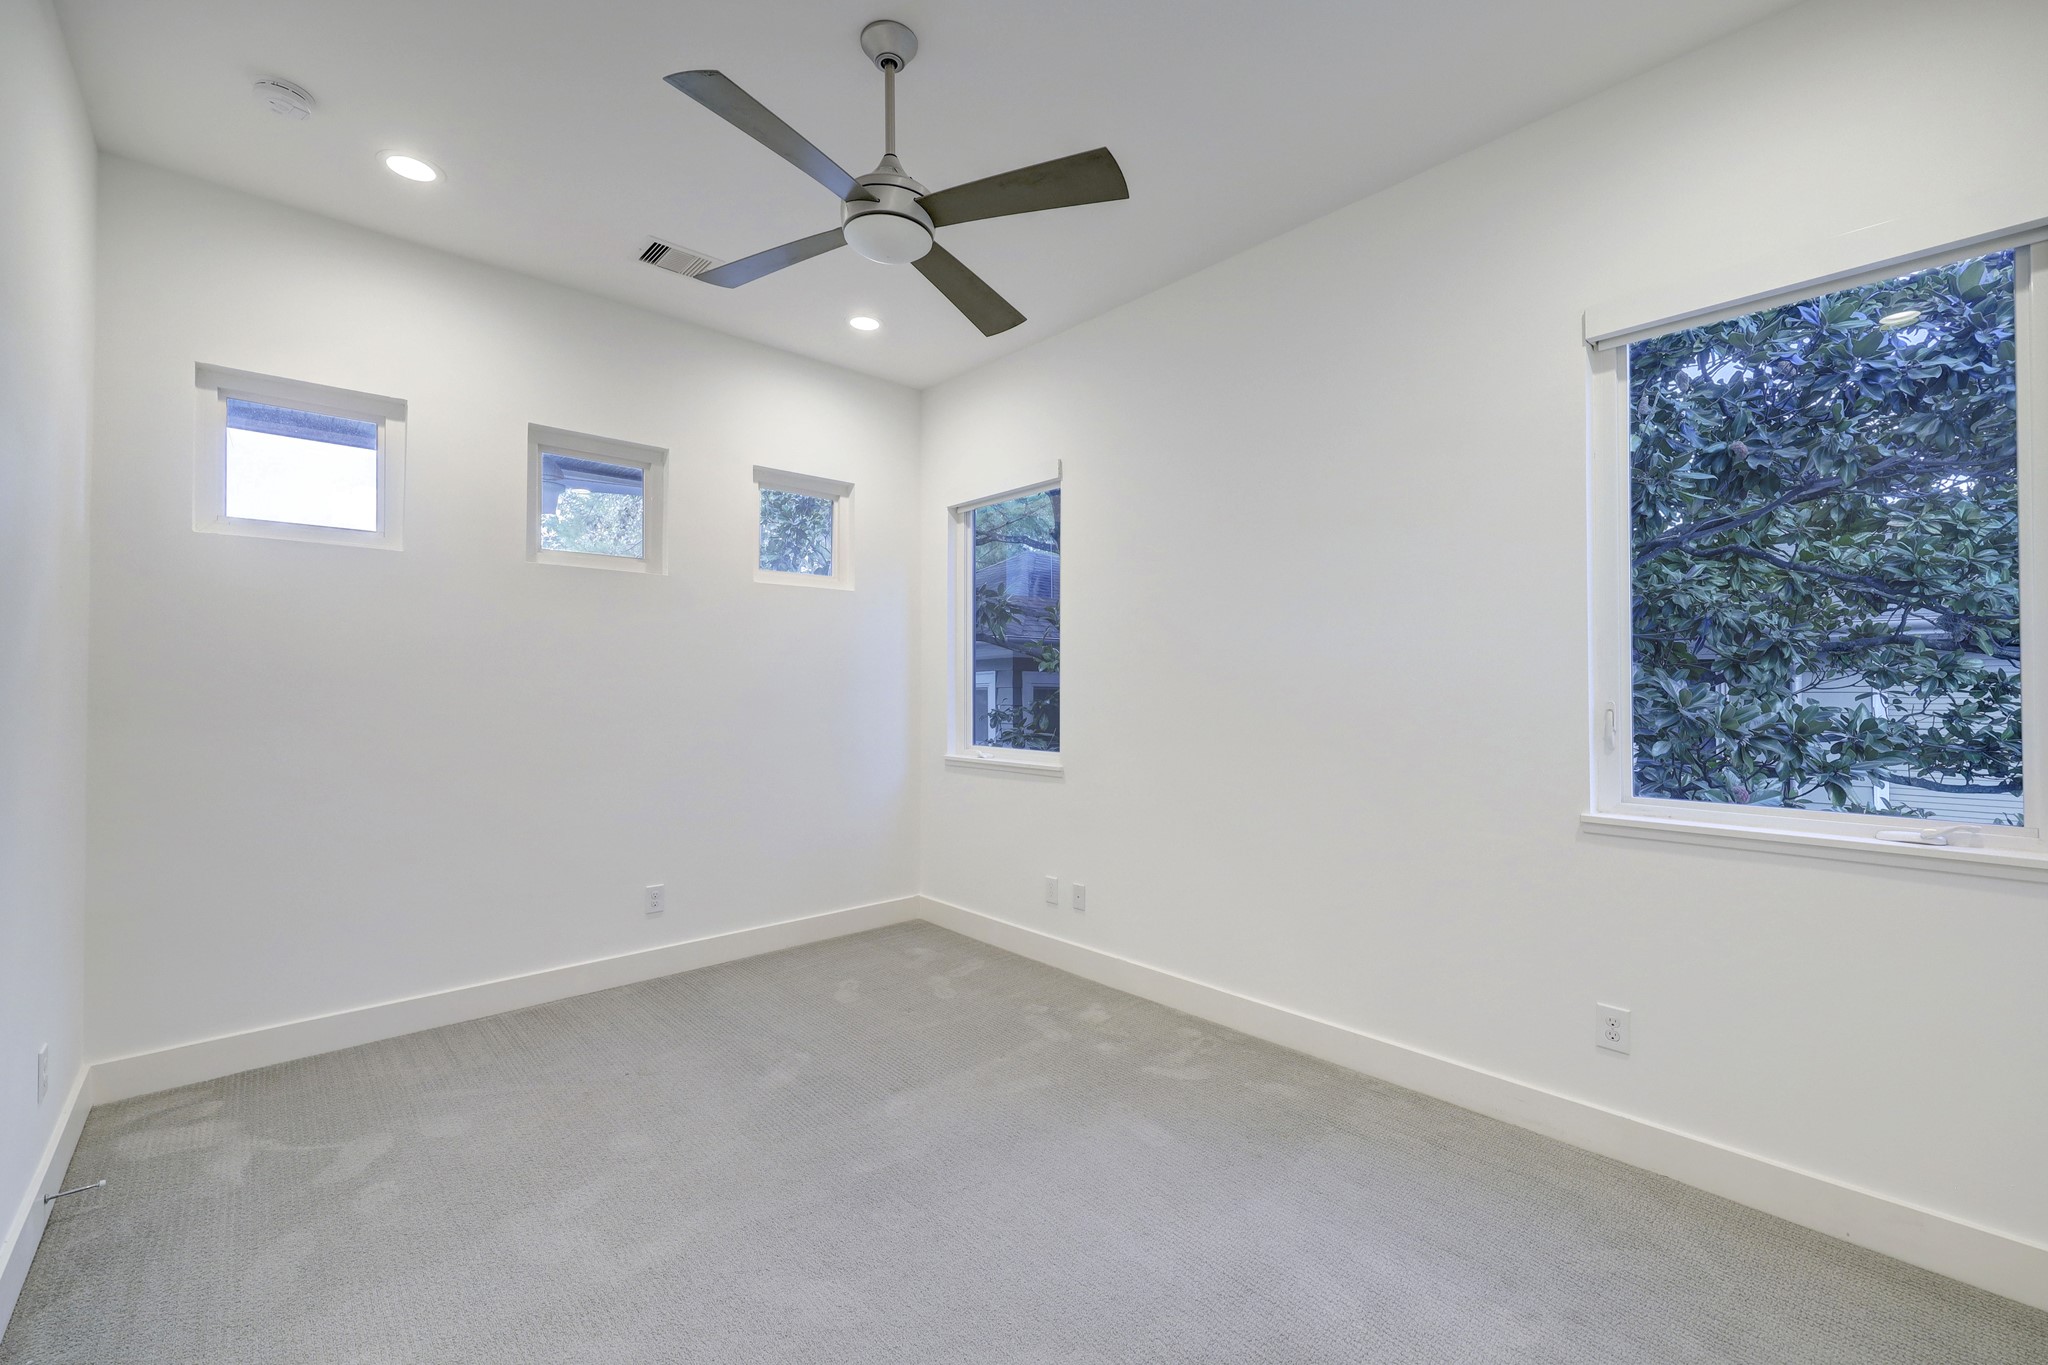 This spacious game room area is ready for endless fun and relaxation. Plenty of space for gaming, recreation, and quality time with family and friends.